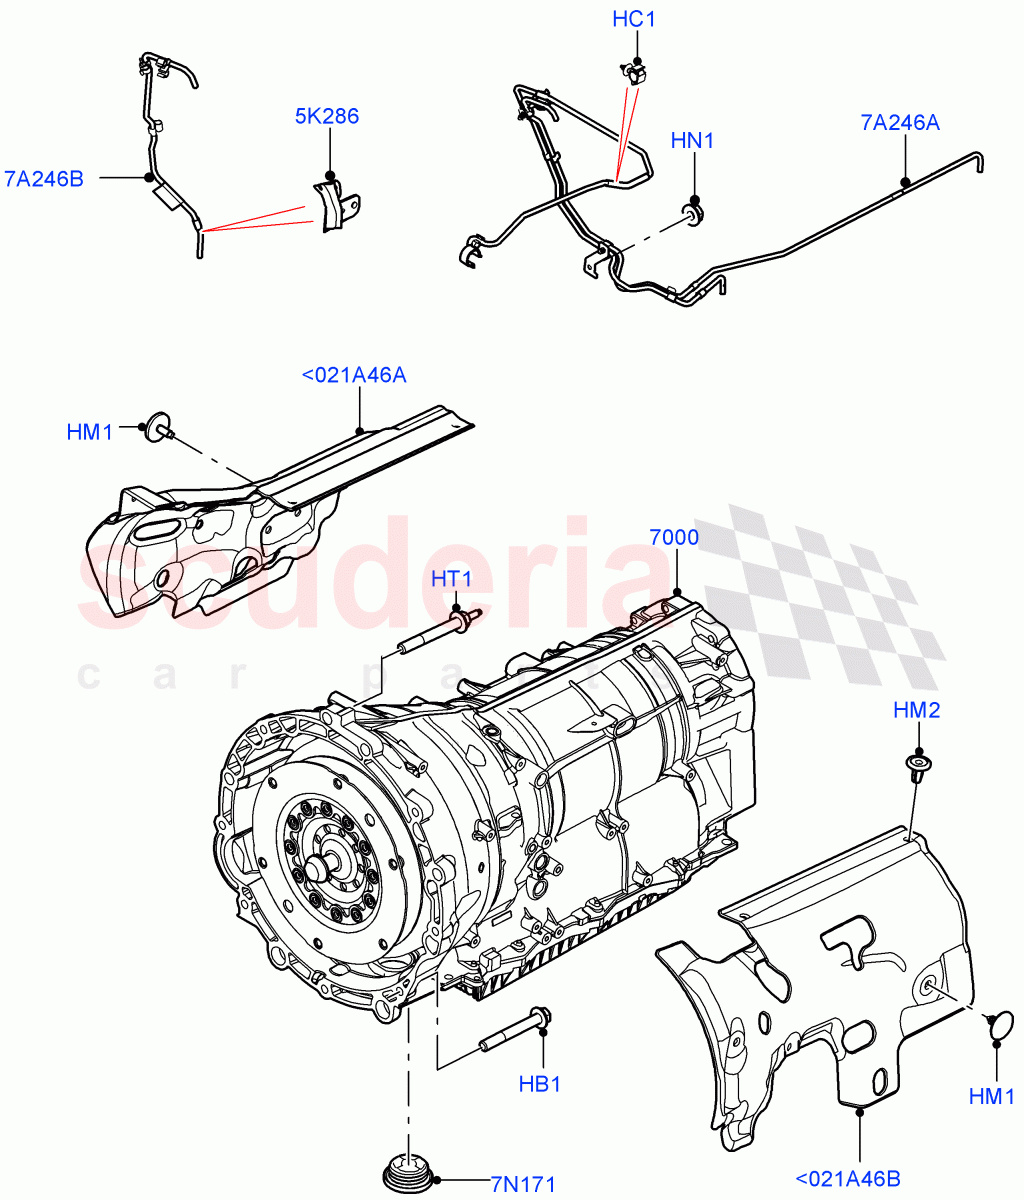 Auto Trans Assy & Speedometer Drive(3.0L AJ20D6 Diesel High,8 Speed Auto Trans ZF 8HP76)((V)FROMLA000001) of Land Rover Land Rover Range Rover (2012-2021) [3.0 Diesel 24V DOHC TC]